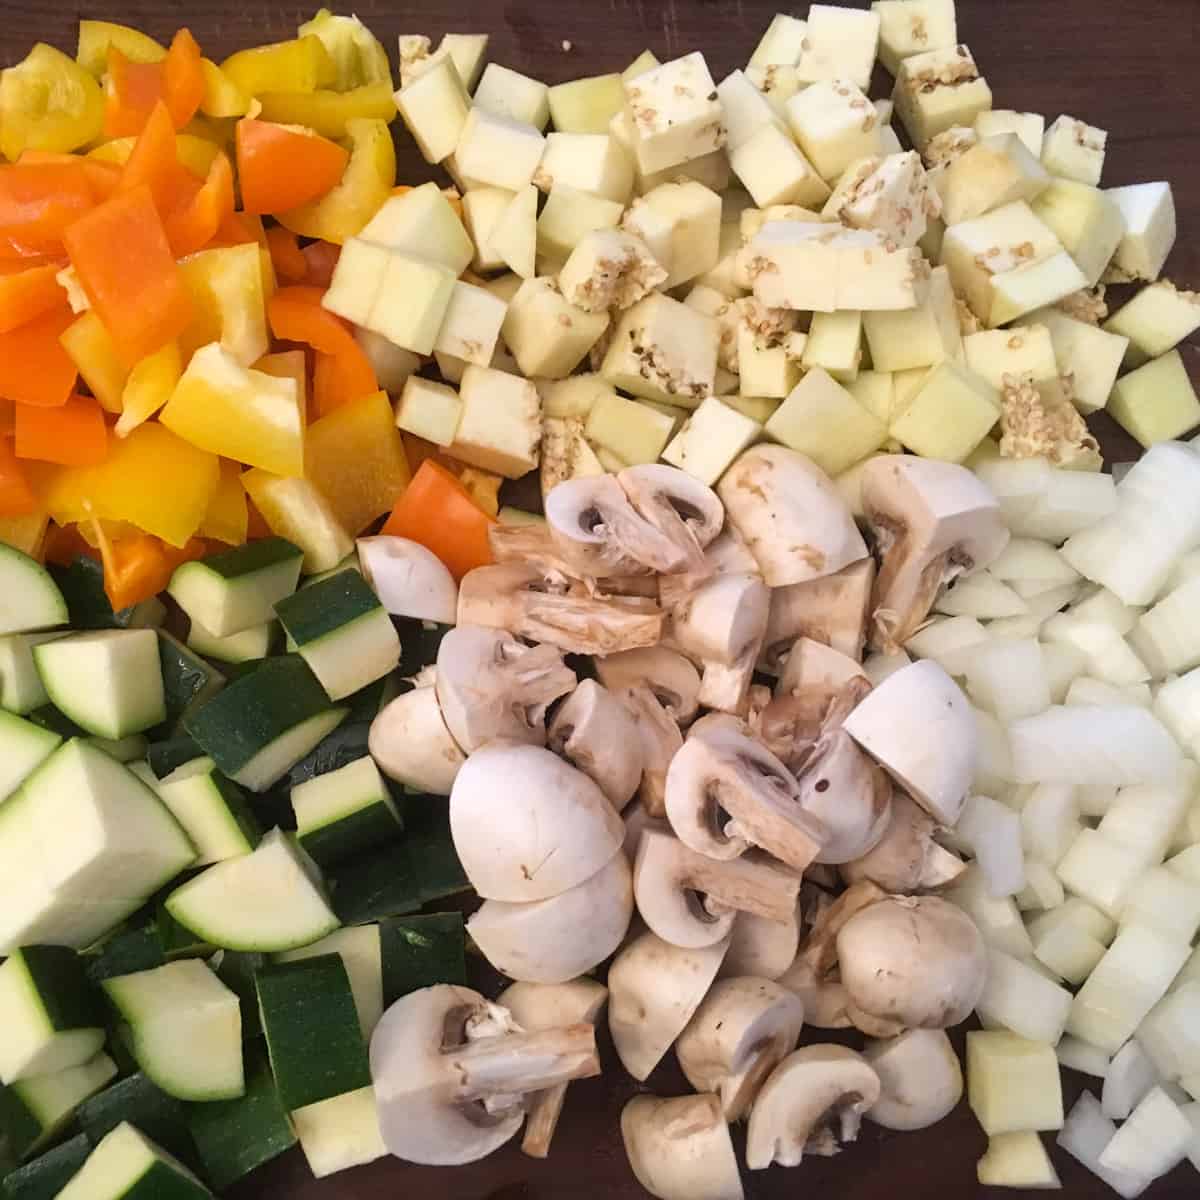 Zucchini, eggplant, mushrooms and other vegetables all cut into cubes.